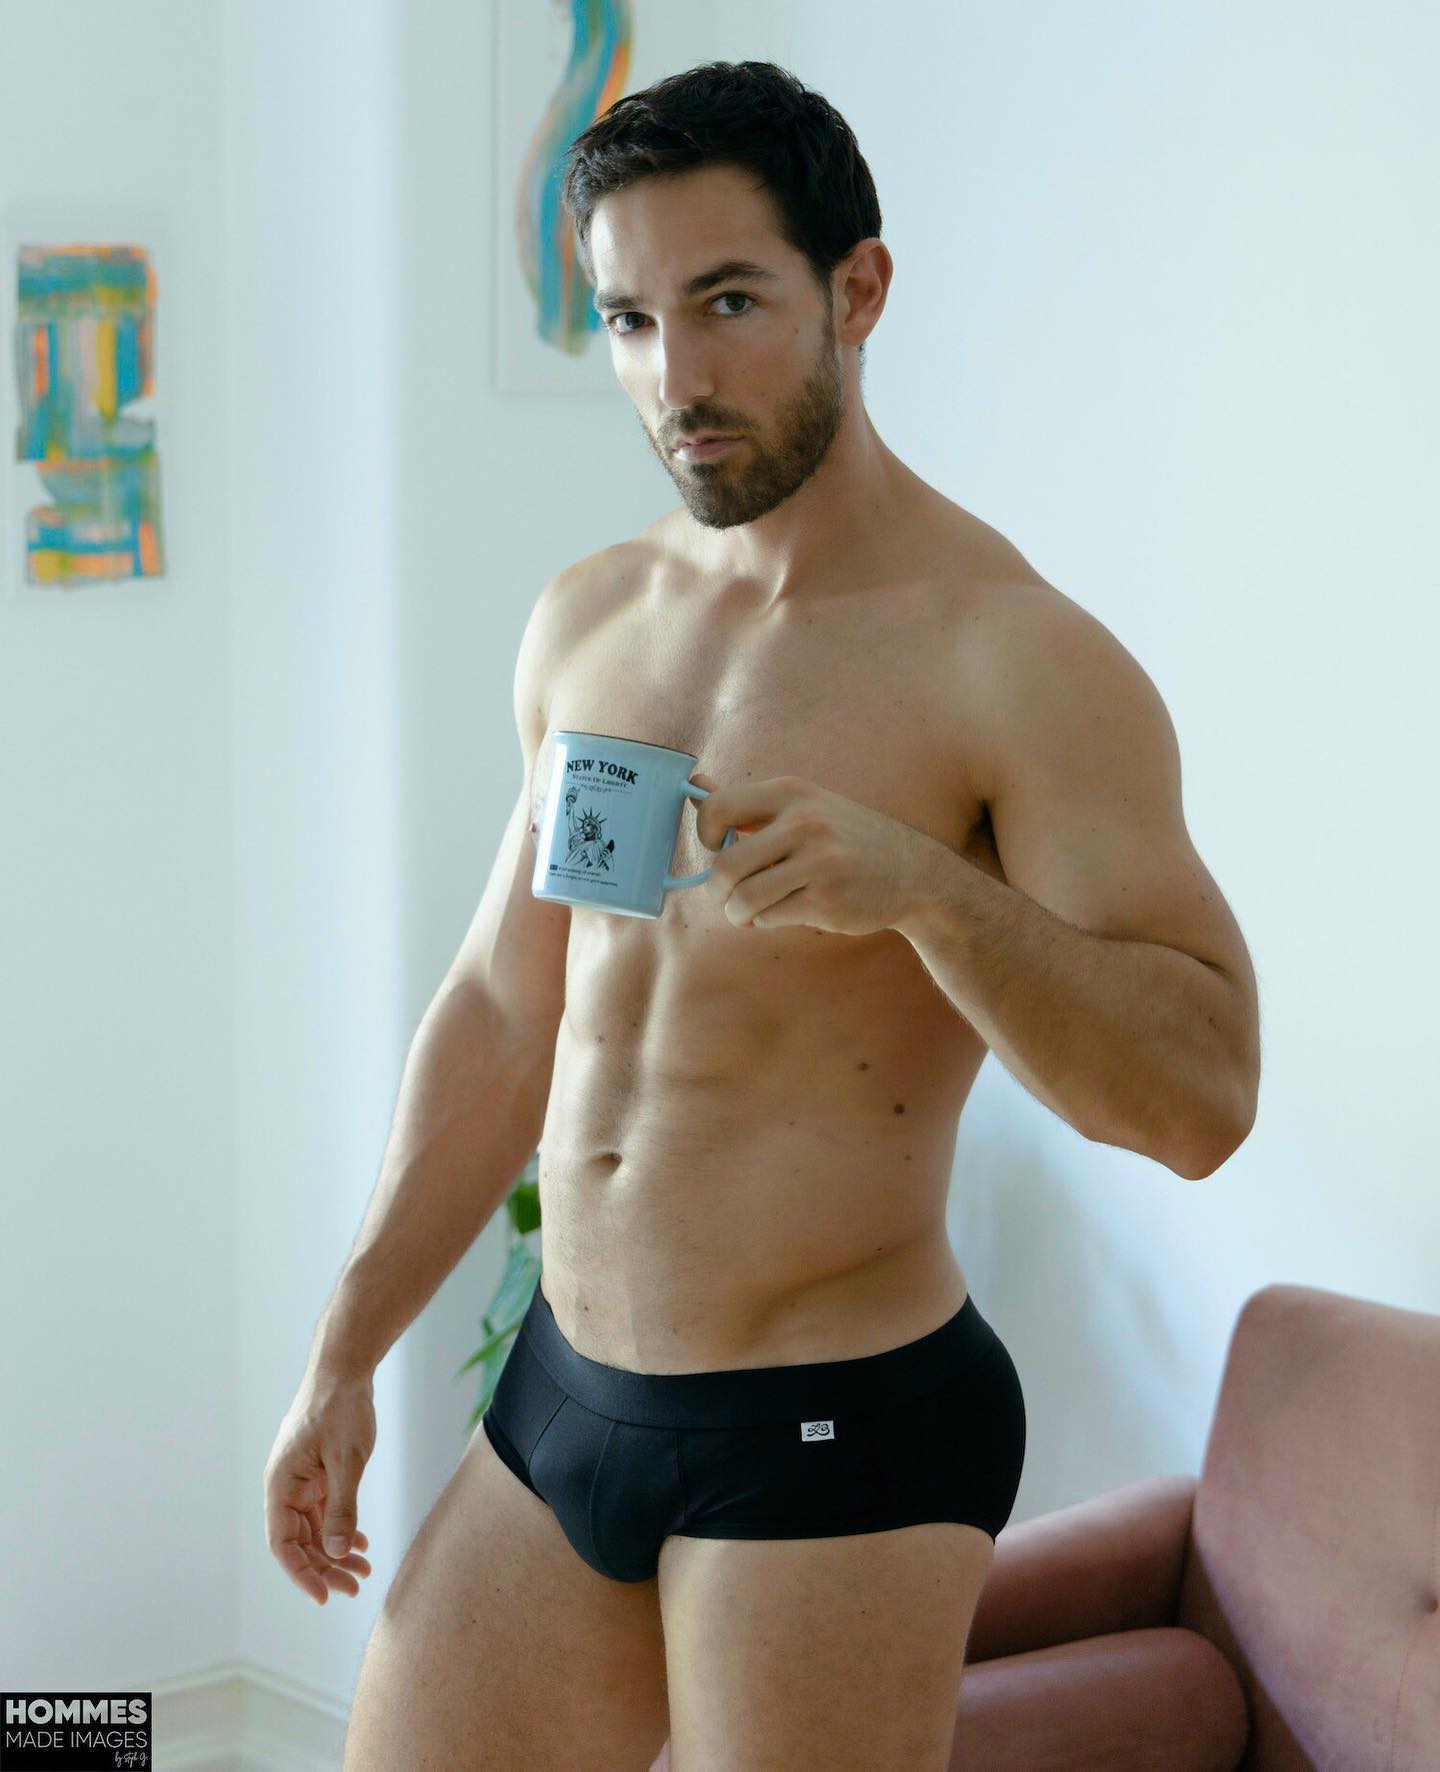 Mid-rise briefs in black designed in France by LeBeauTom. These perfect briefs are manufactured in Portugal with top-quality materials. Check them out:
_____
menandunderwear.com/shop